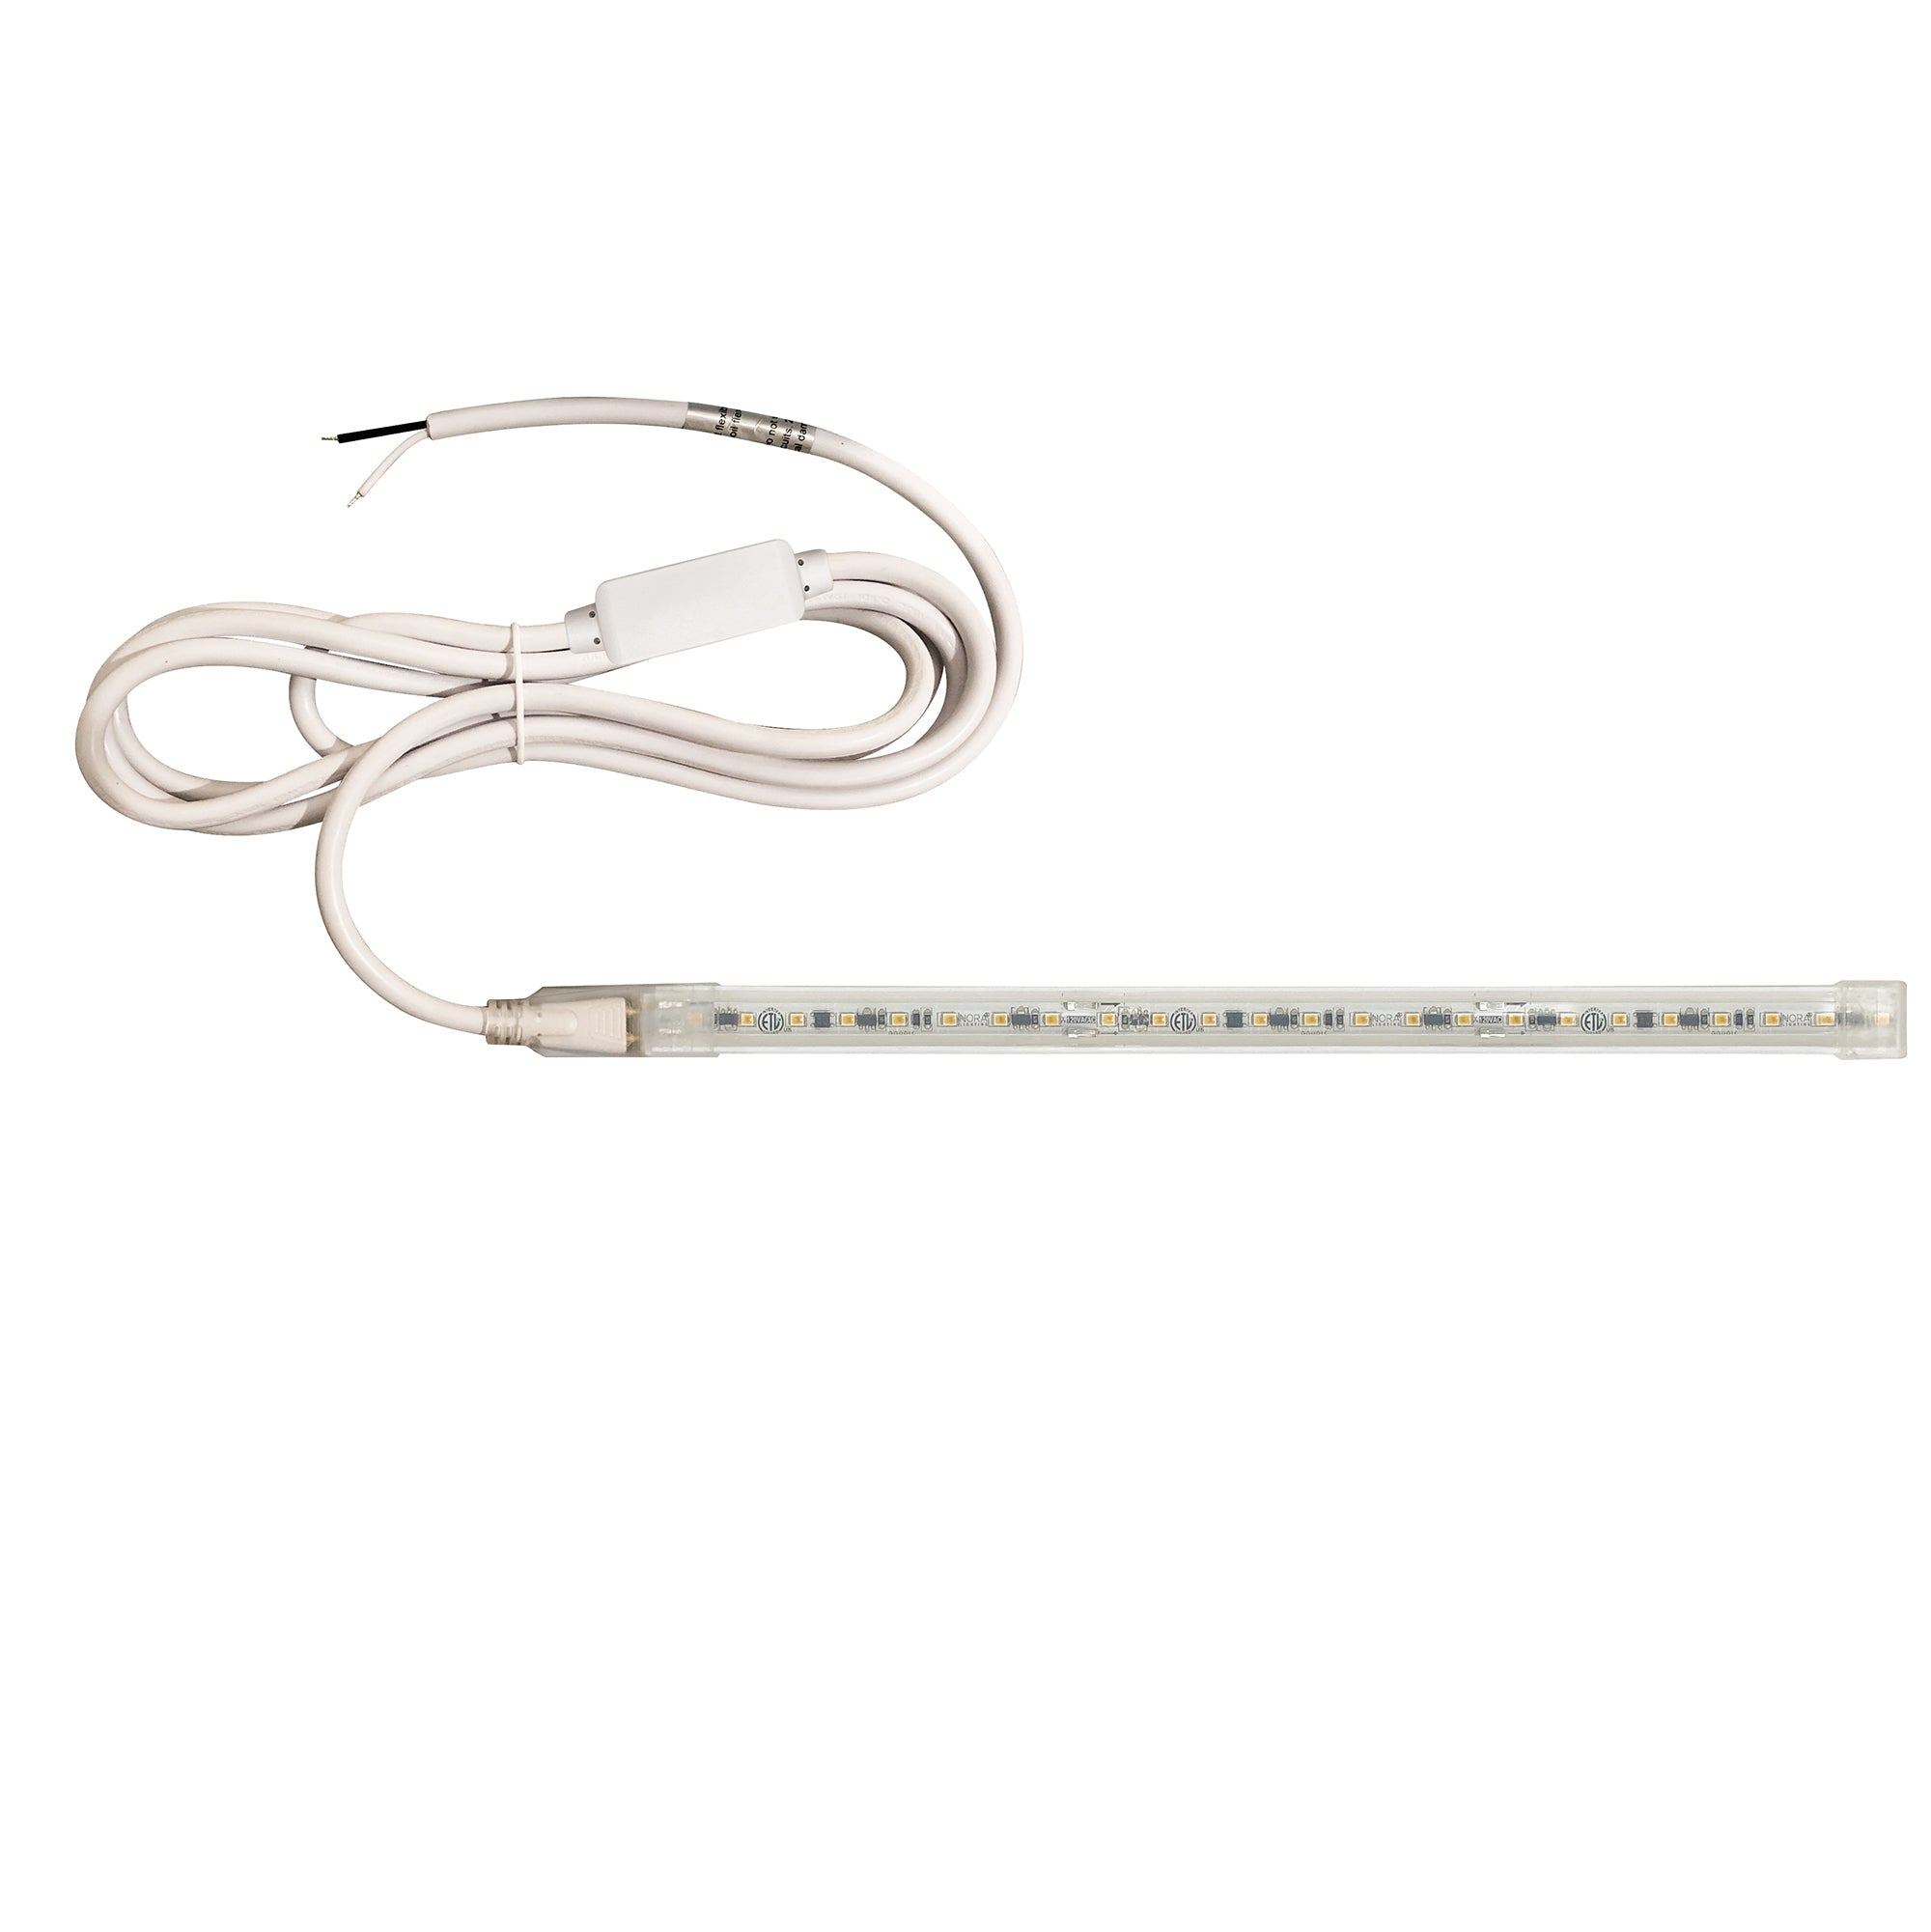 Nora Lighting NUTP13-W74-12-930/HWSP - Accent / Undercabinet - Custom Cut 74-ft 120V Continuous LED Tape Light, 330lm / 3.6W per foot, 3000K, w/ Mounting Clips and 8' Hardwired Power Cord w/ Surge Protector